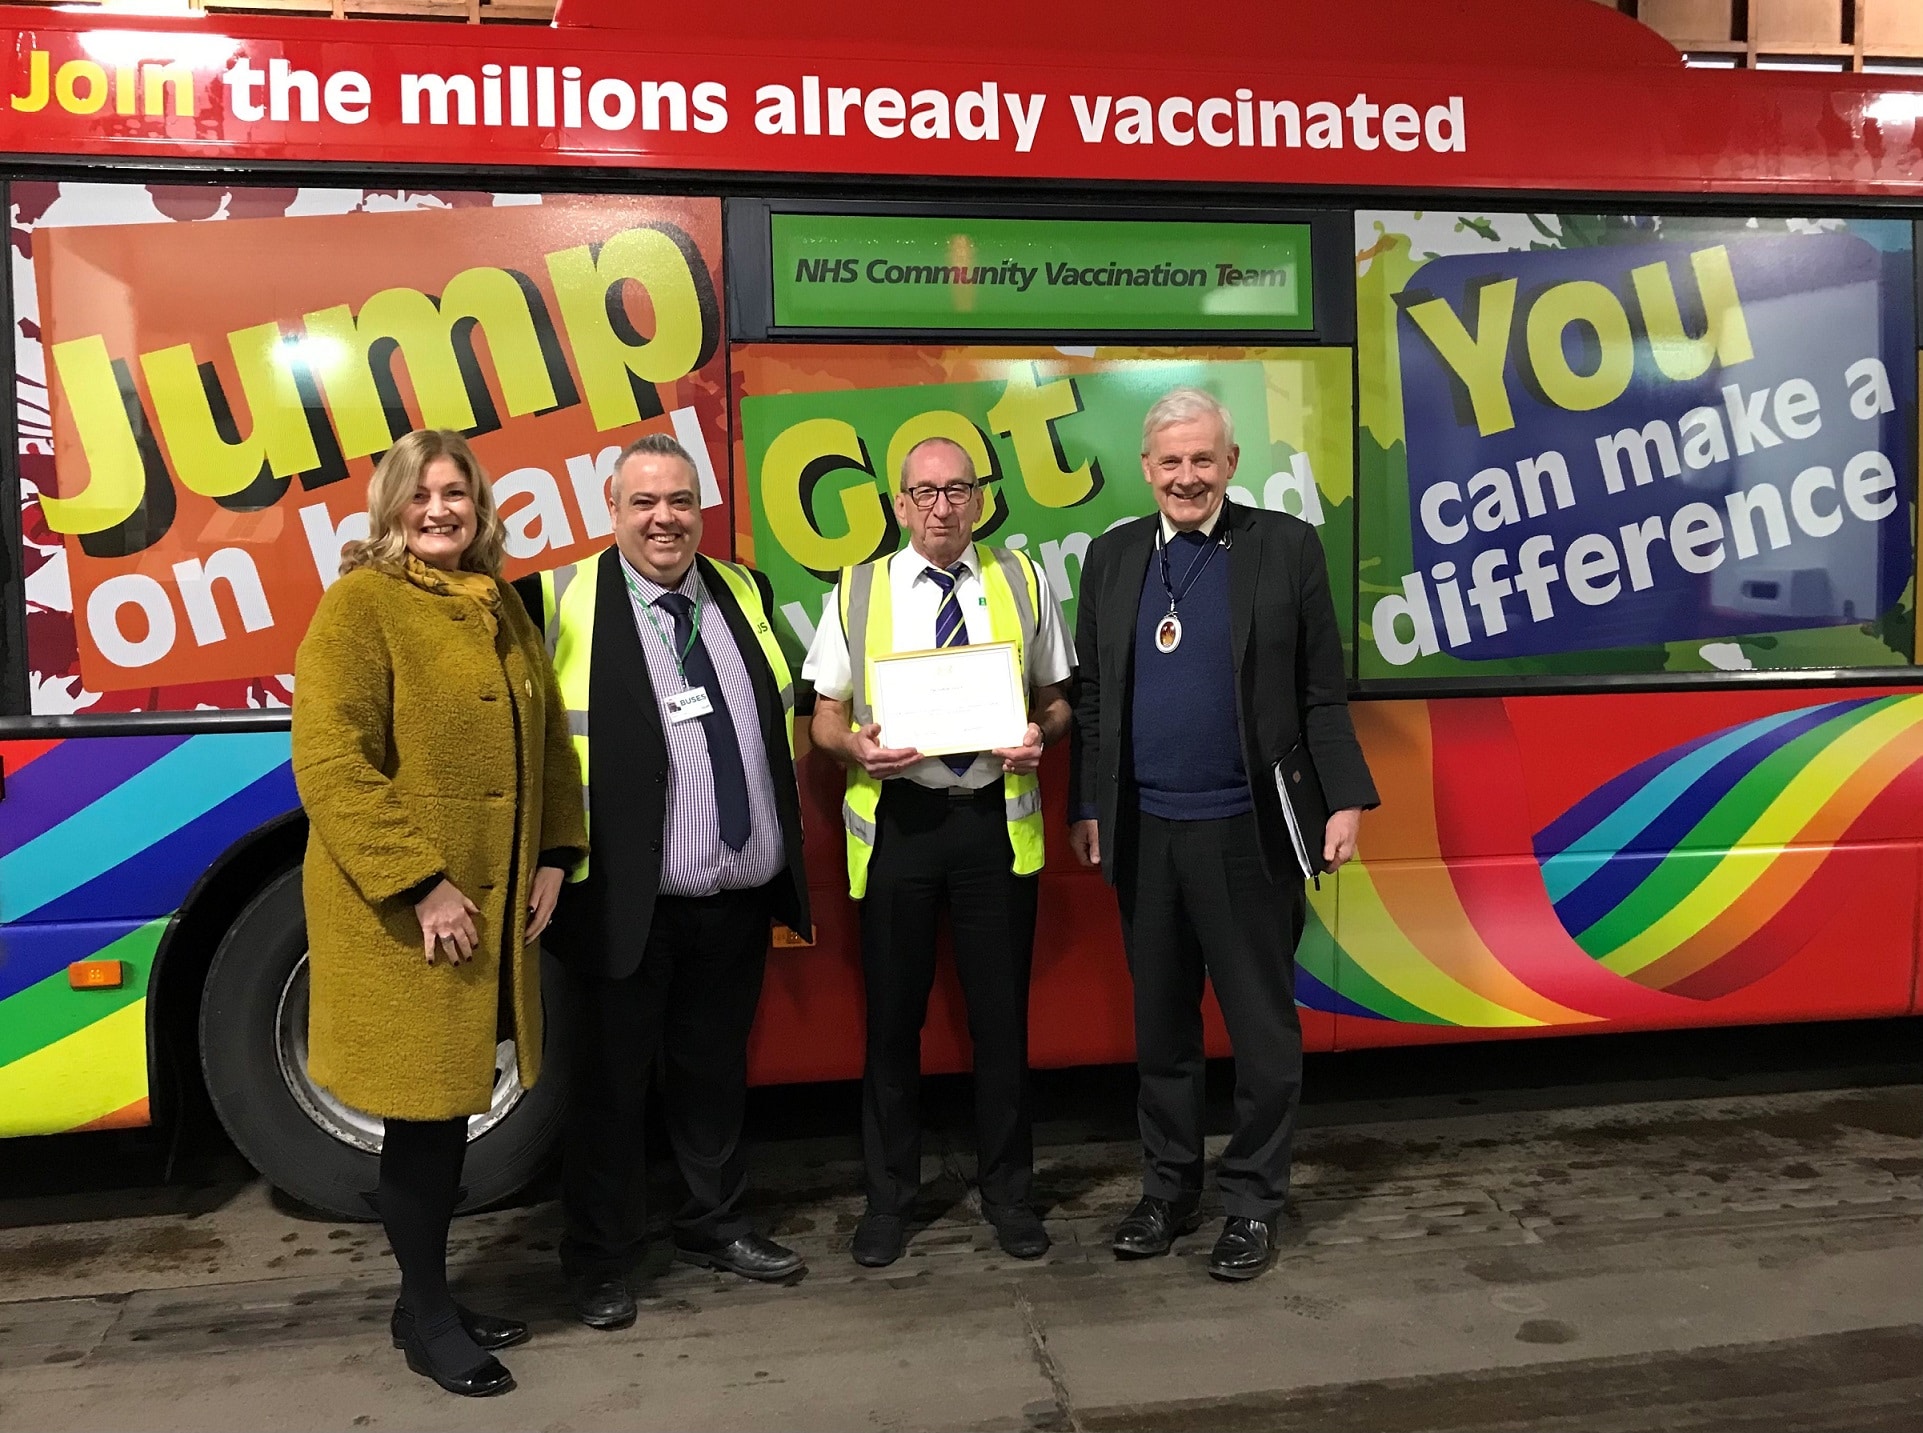 Ipswich Buses driver Steve Harvey recognised for vaccination bus work